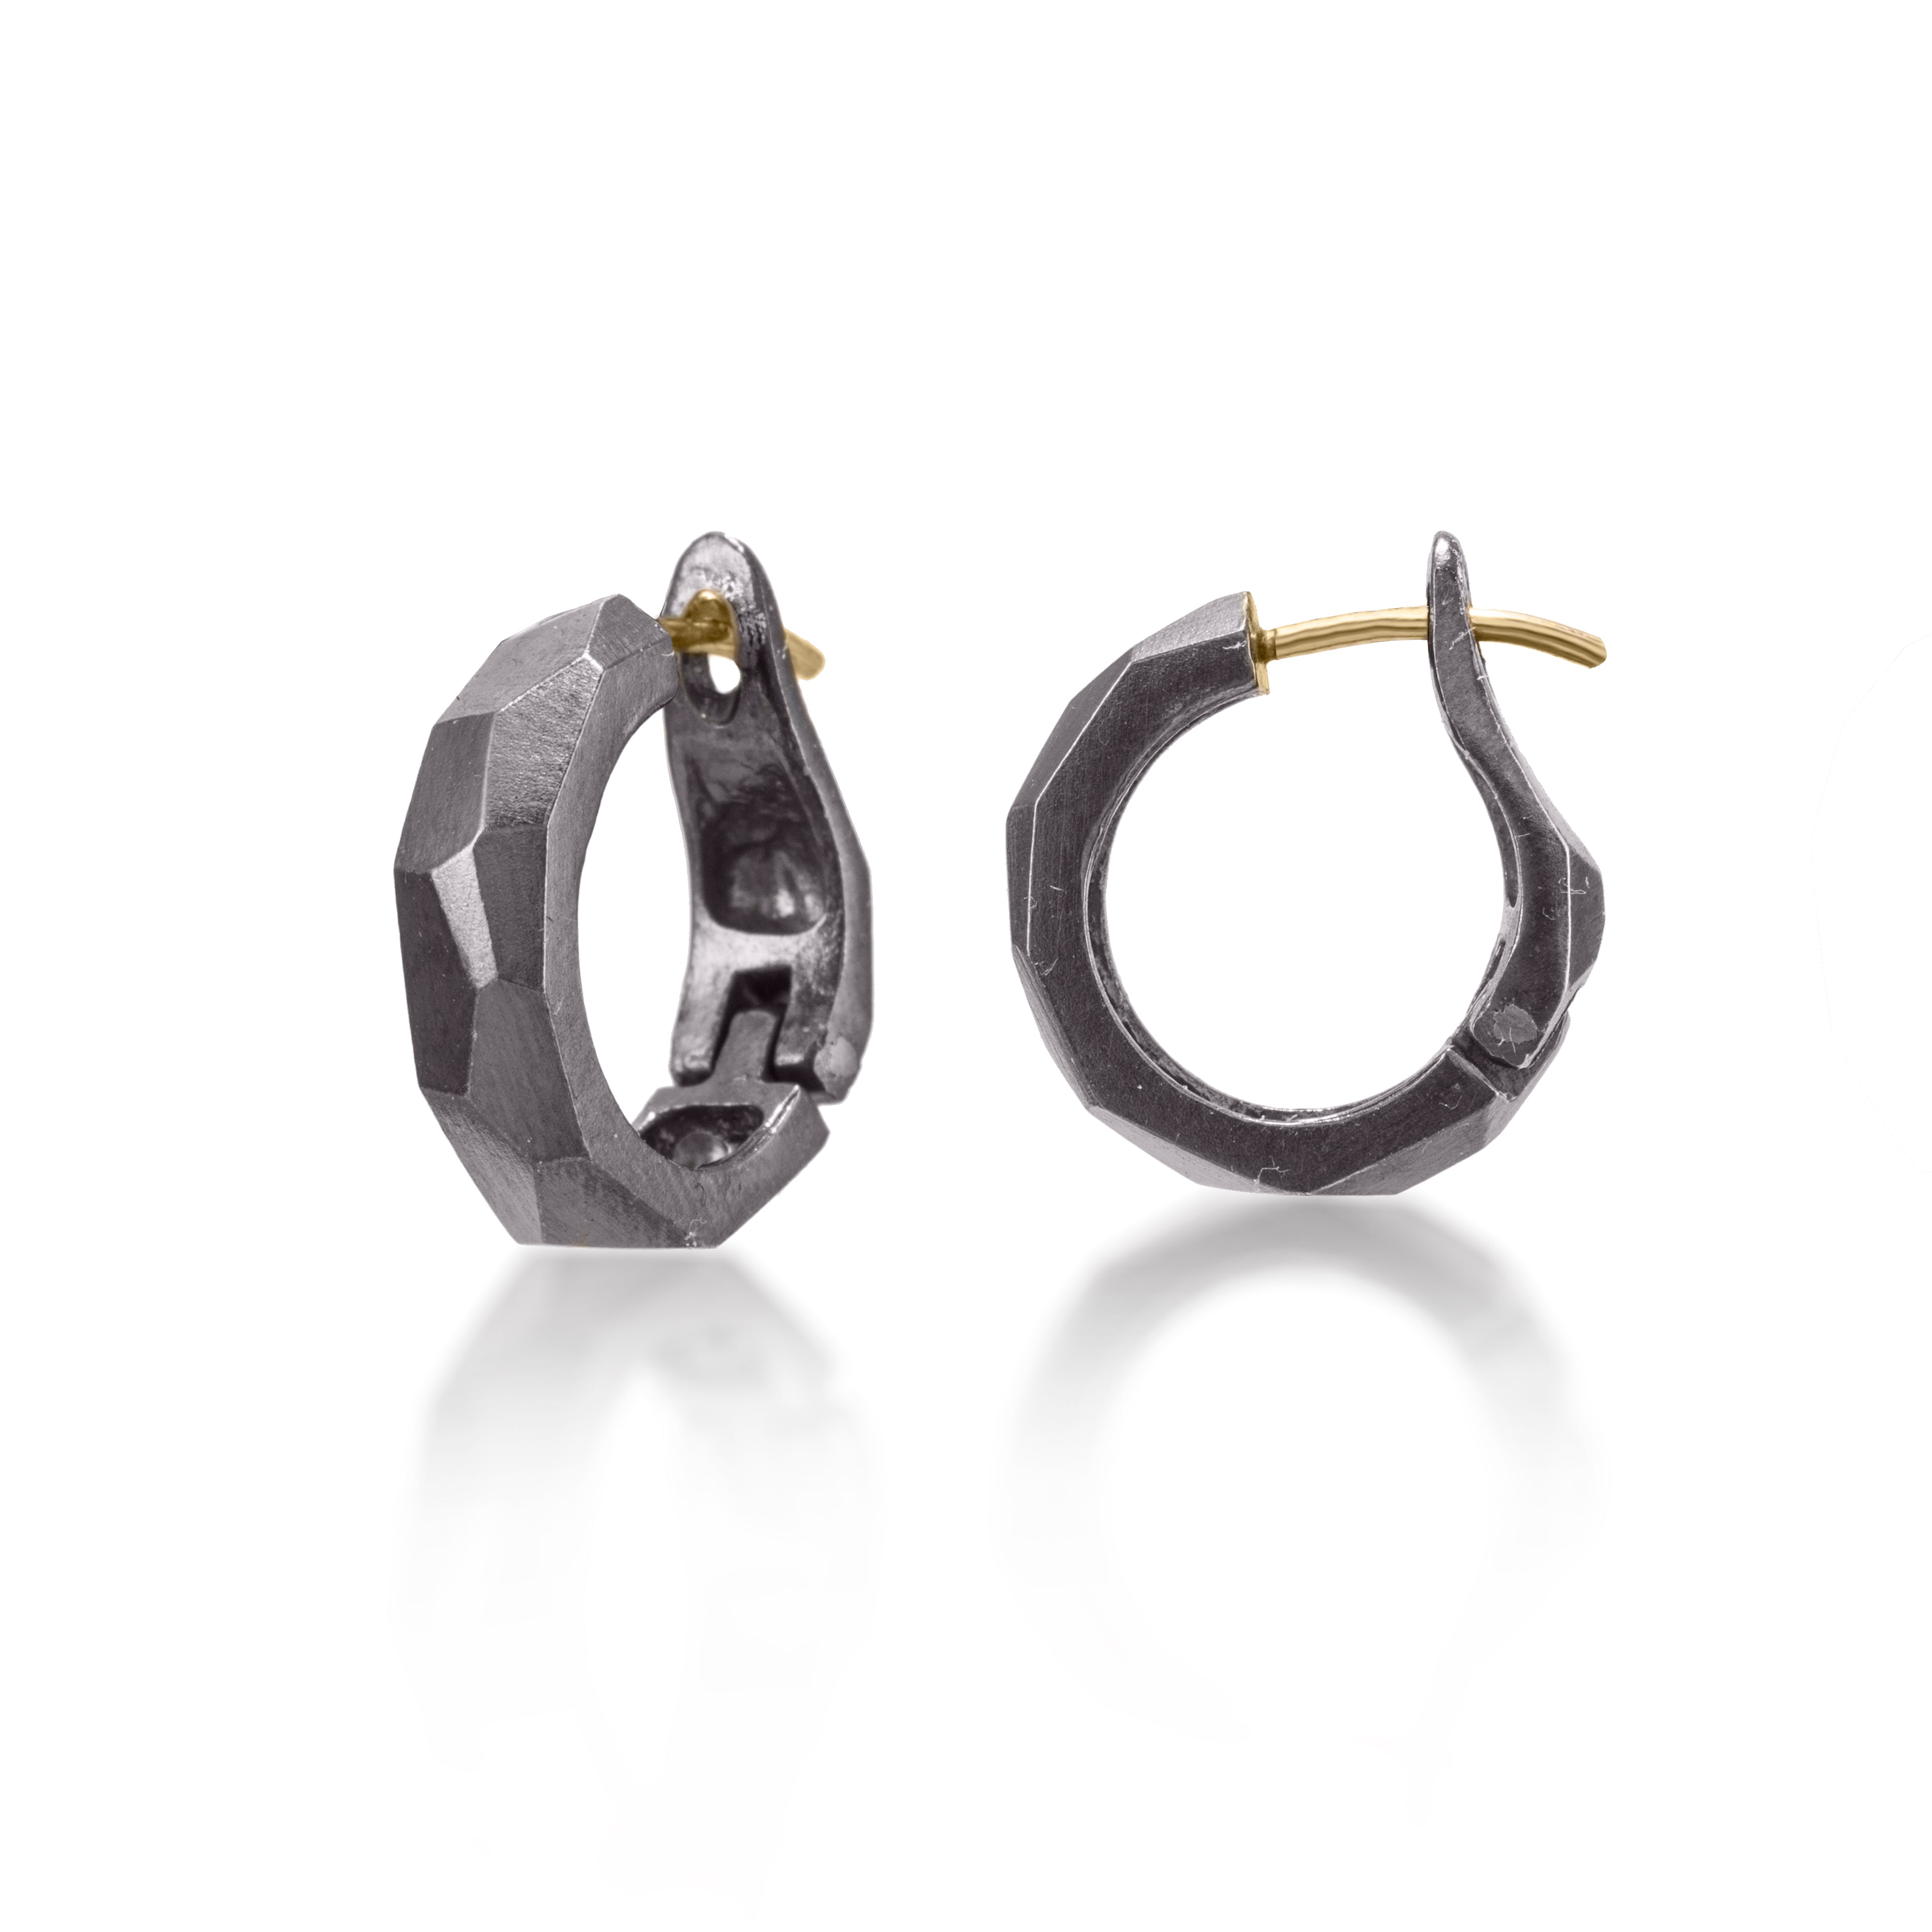 Chunky little huggie hoops, crisply hand faceted in four color ways, oxidized silver, 18k gold, palladium or platinum. 18k ear posts and a satisfying click closer.